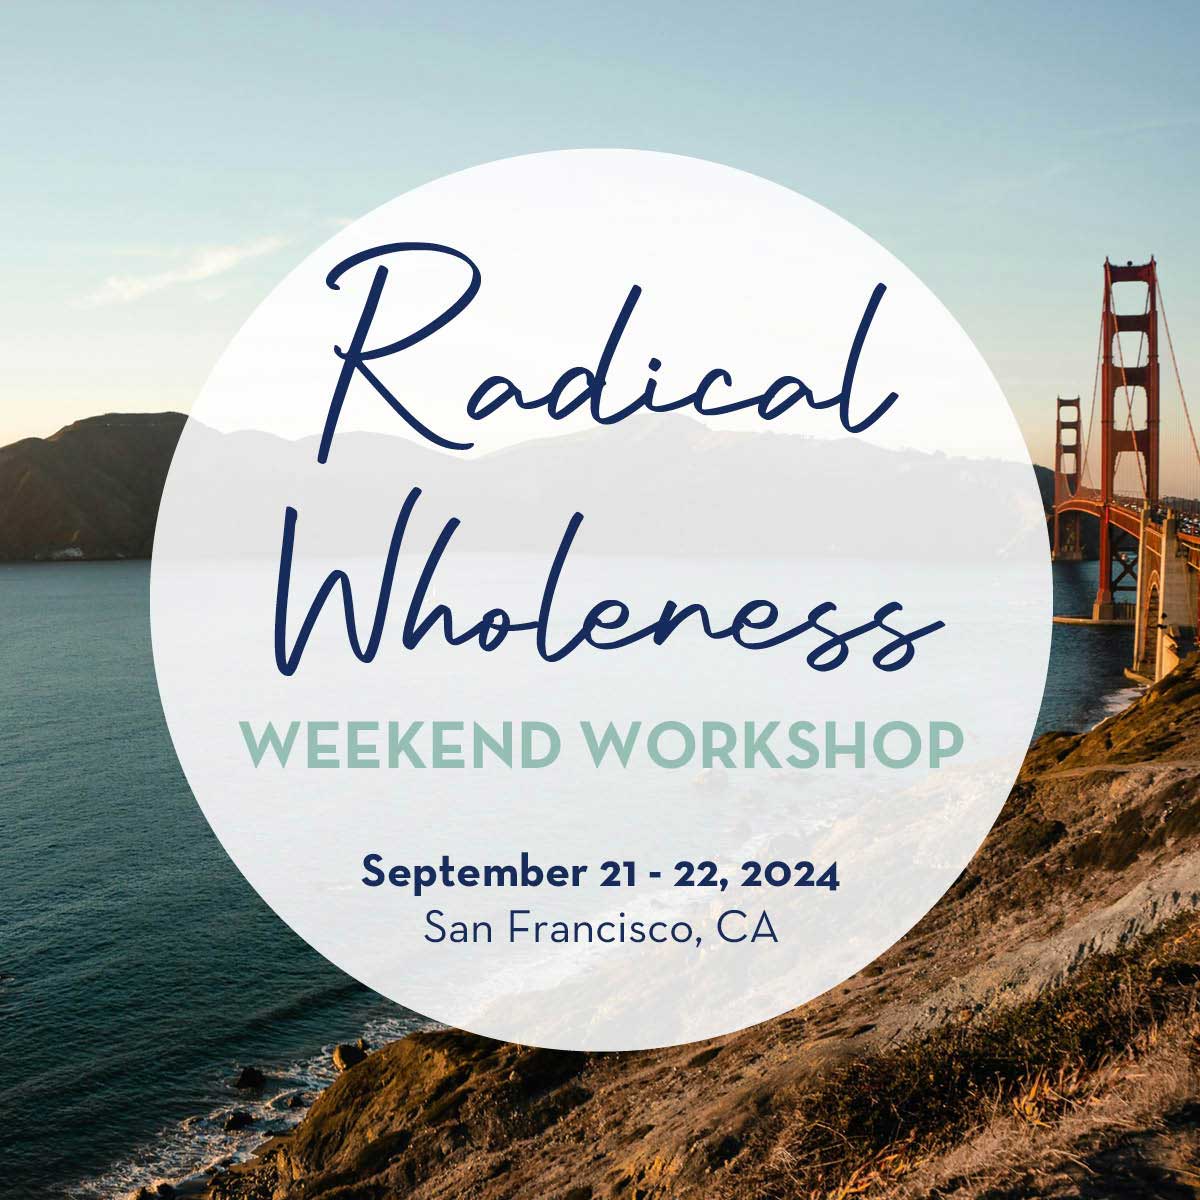 Radical Wholeness Weekend Workshop: San Francisco, CA - The Embodied Present Process